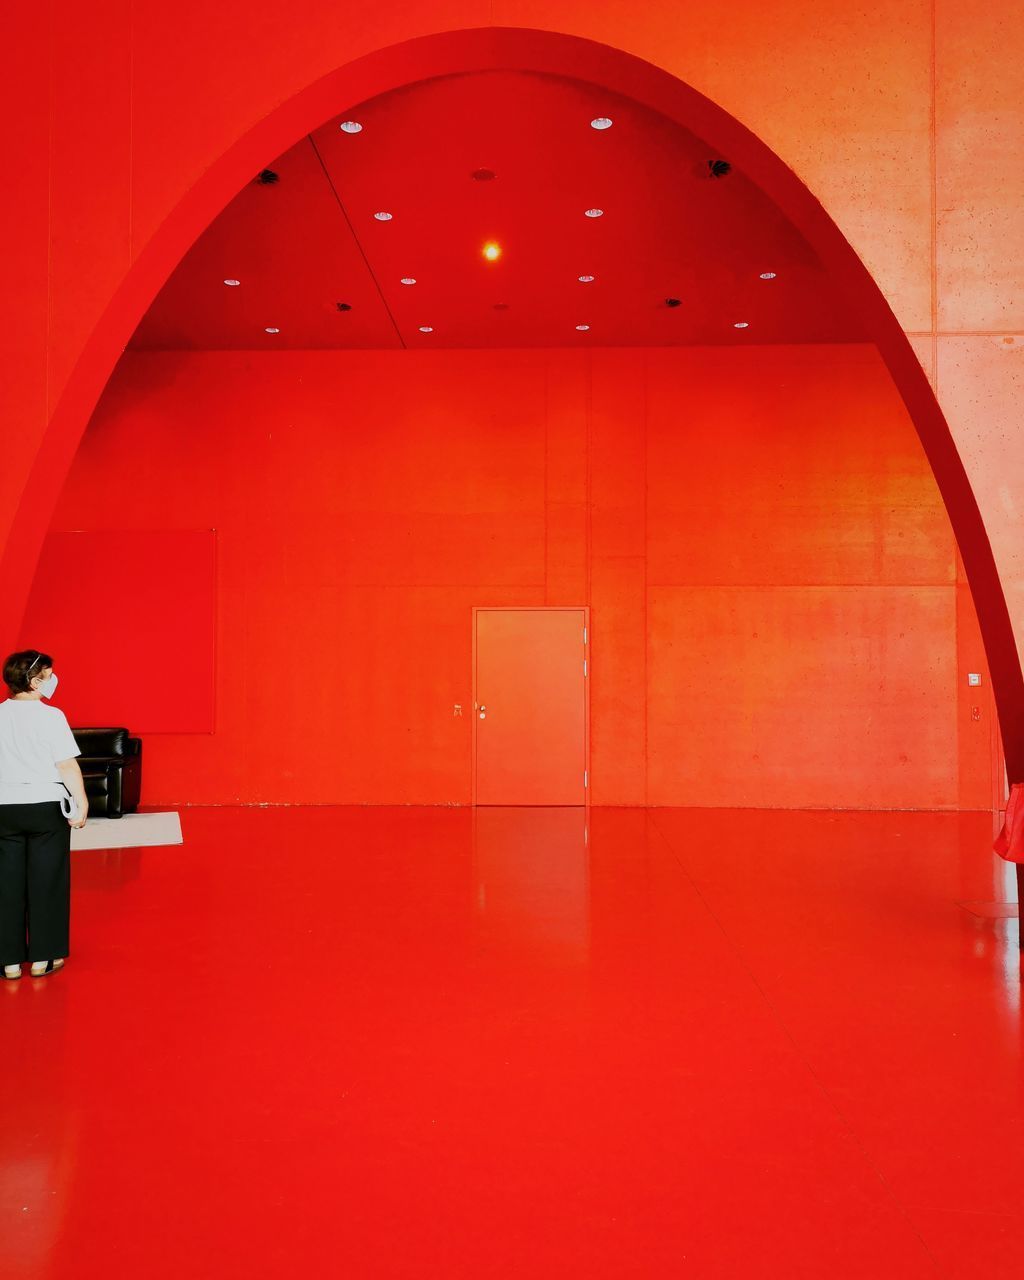 LOW ANGLE VIEW OF ILLUMINATED RED WALL AND LIGHT